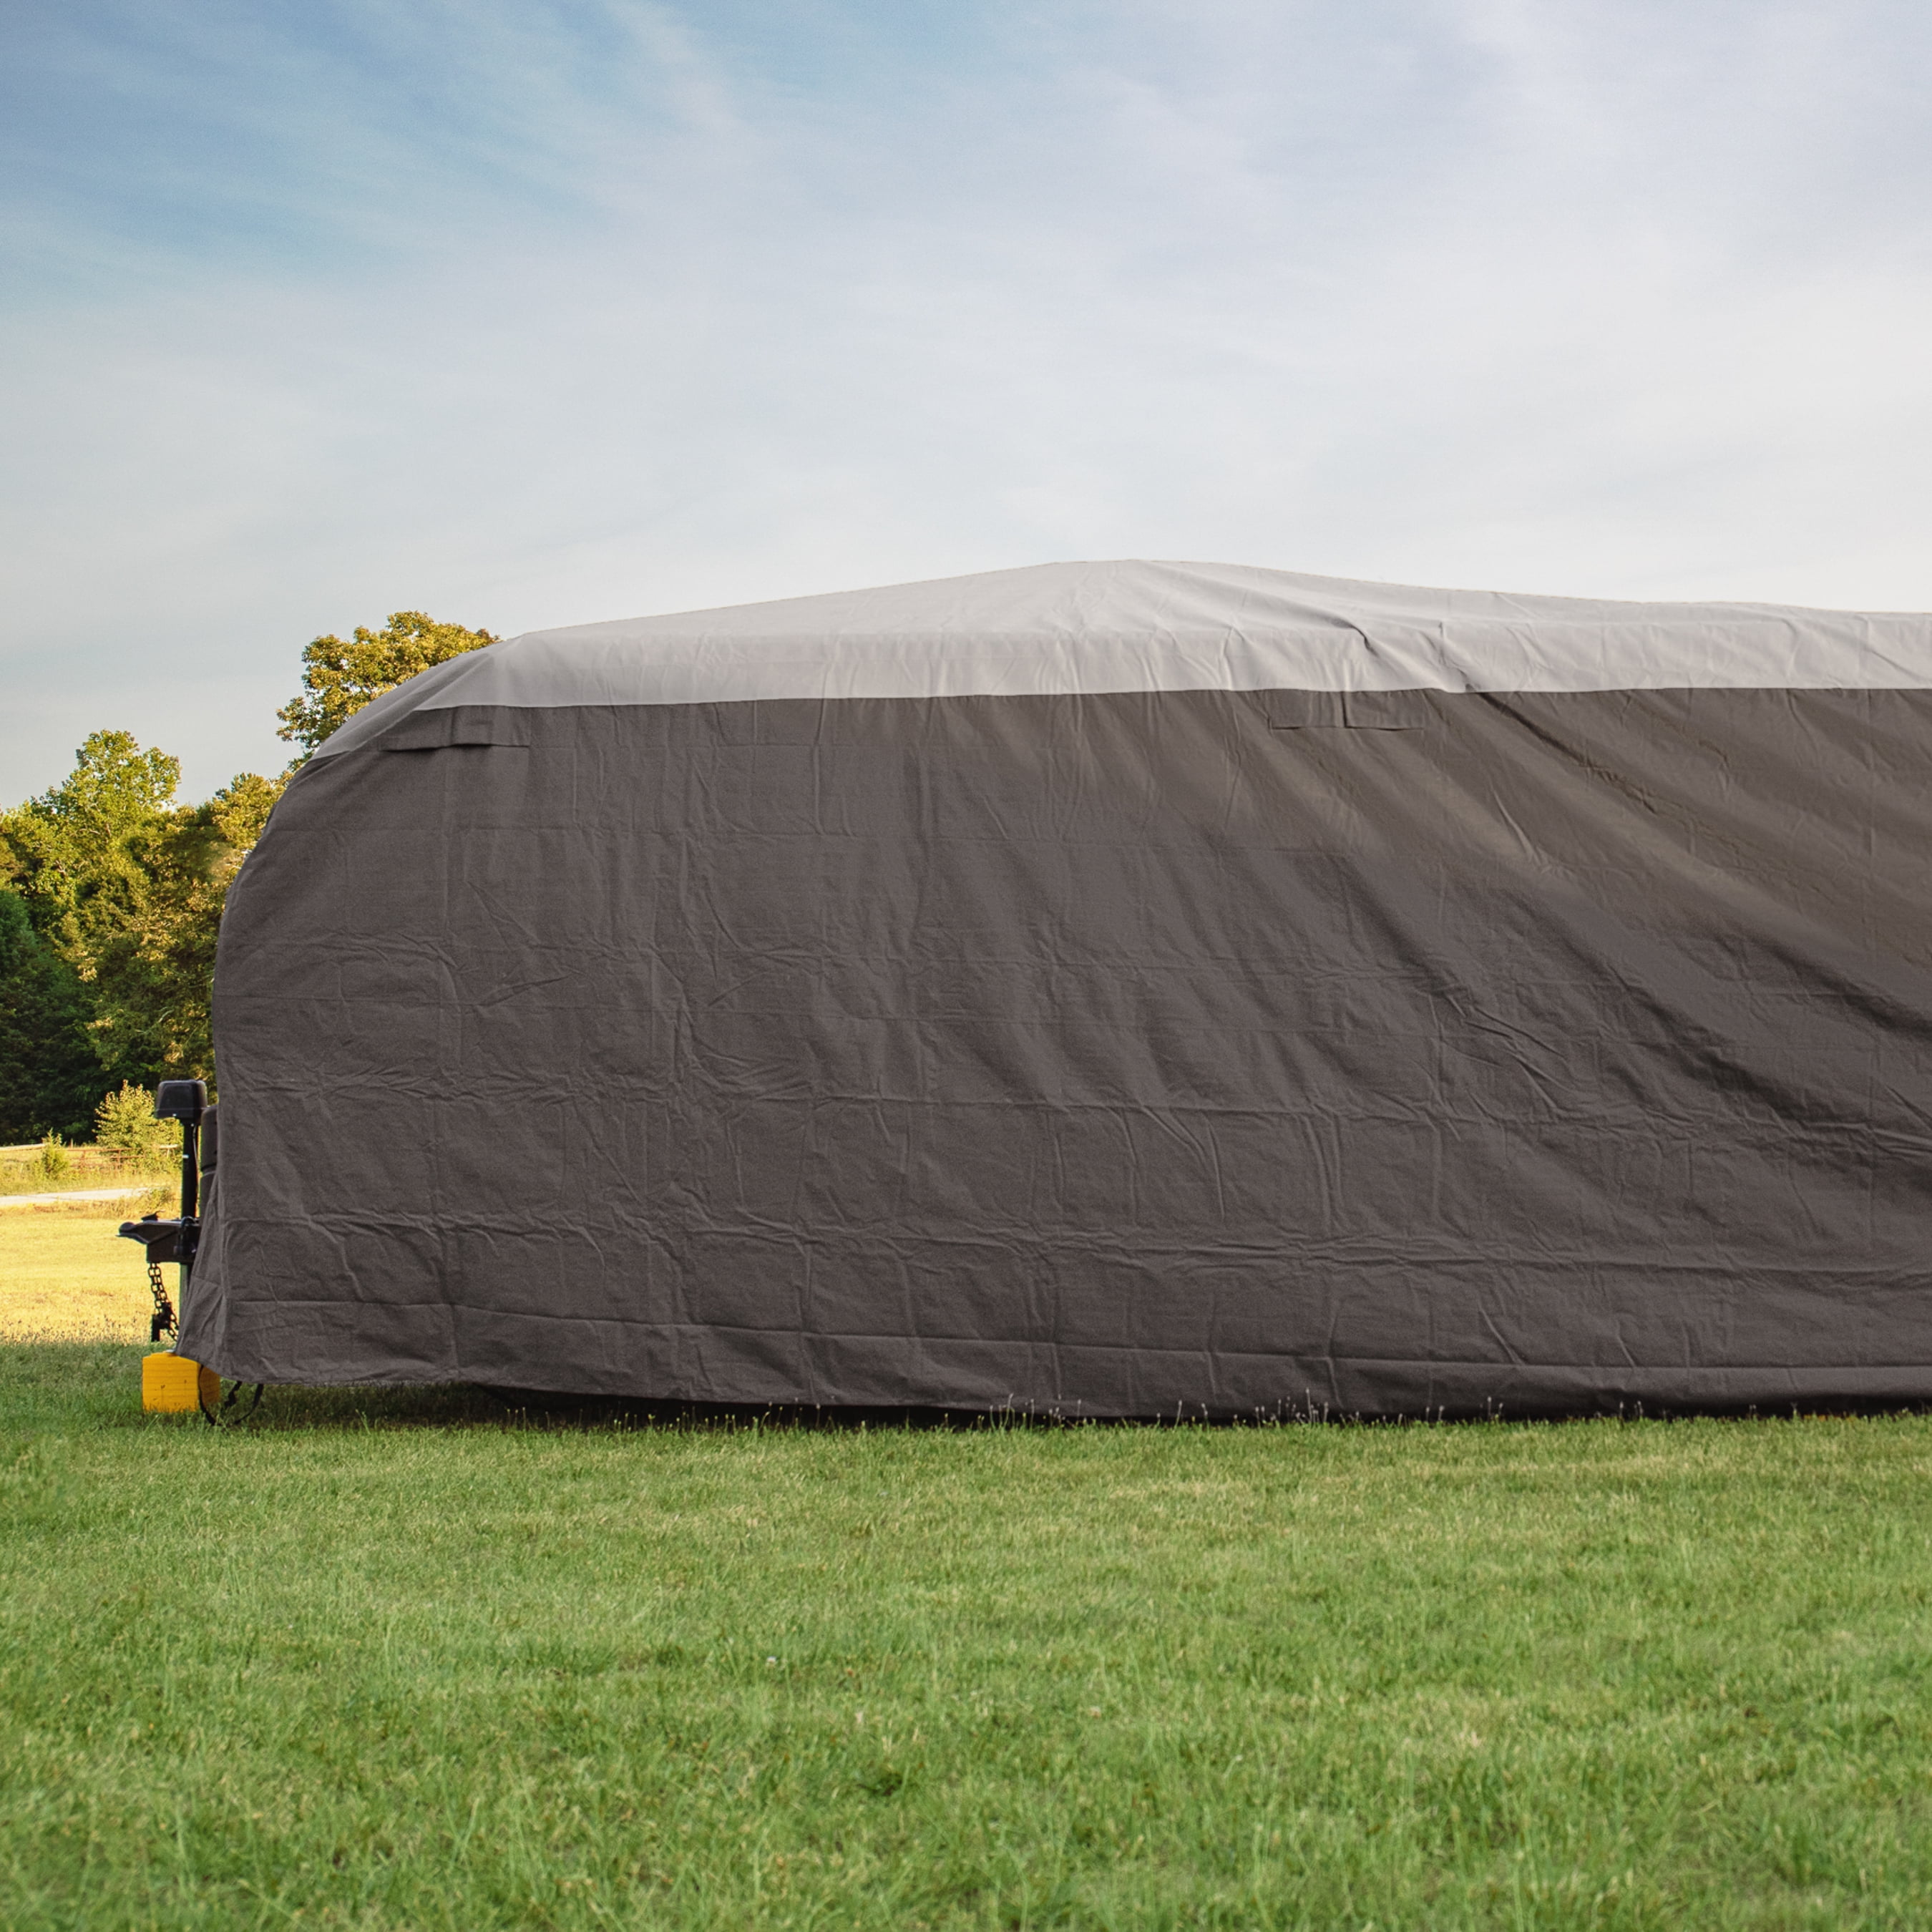 Camco ULTRAGuard RV Cover Fits Class C RVs/Travel Trailers 28 to 30-feet  Extremely Durable Design that Protects Against the Elements (45744) 